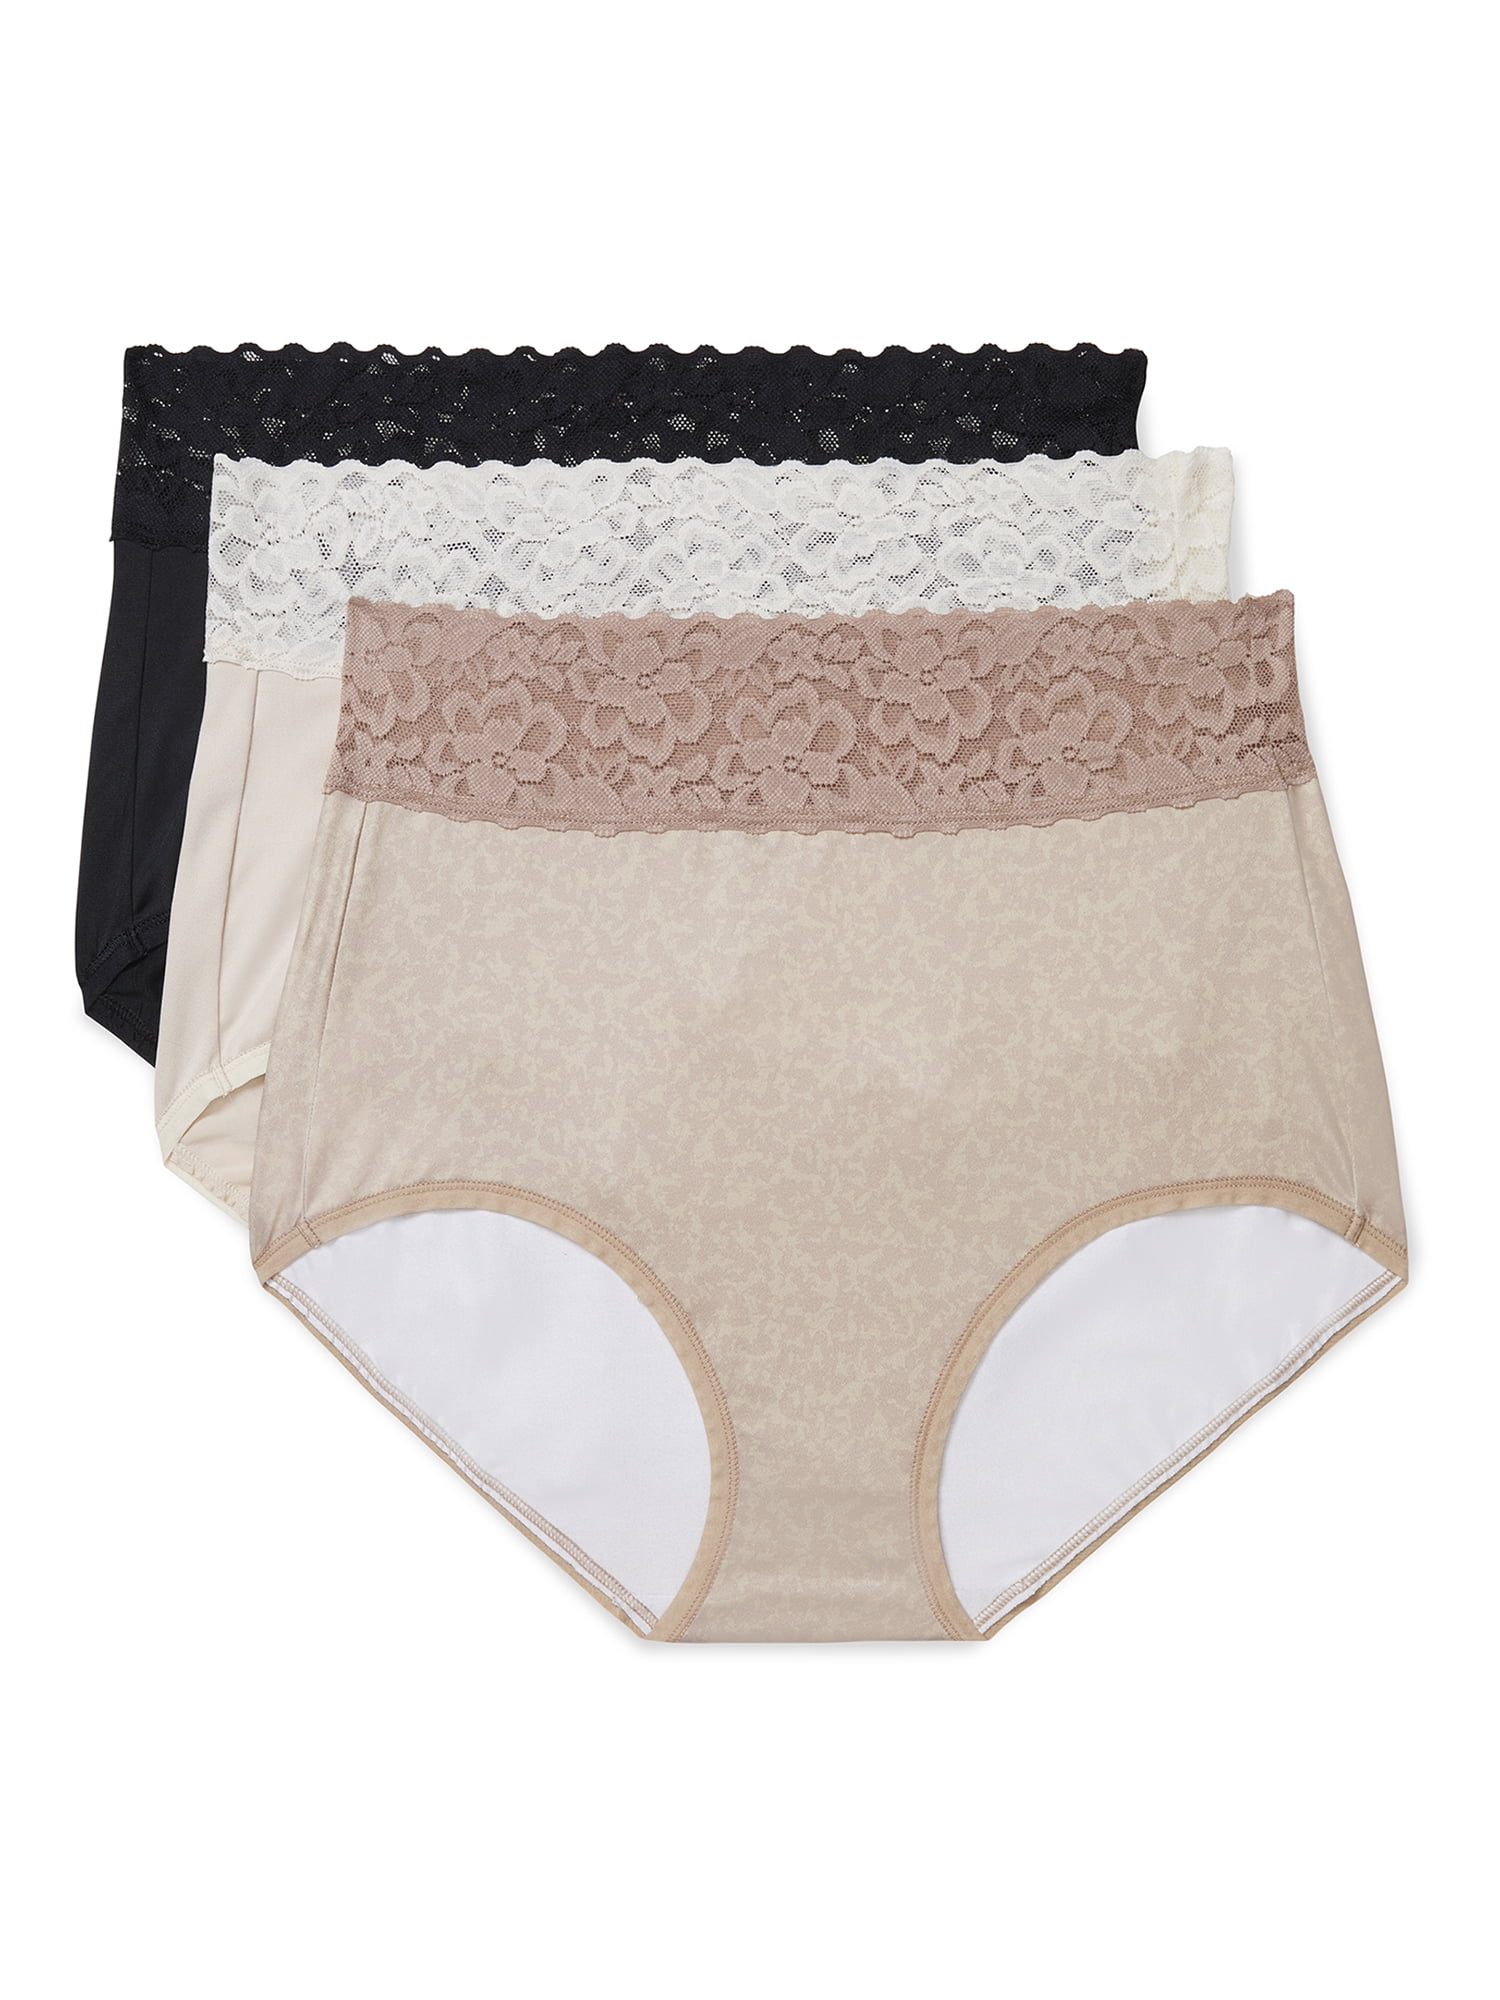 The Warner's Blissful Benefits Underwear Might Be the Comfiest on